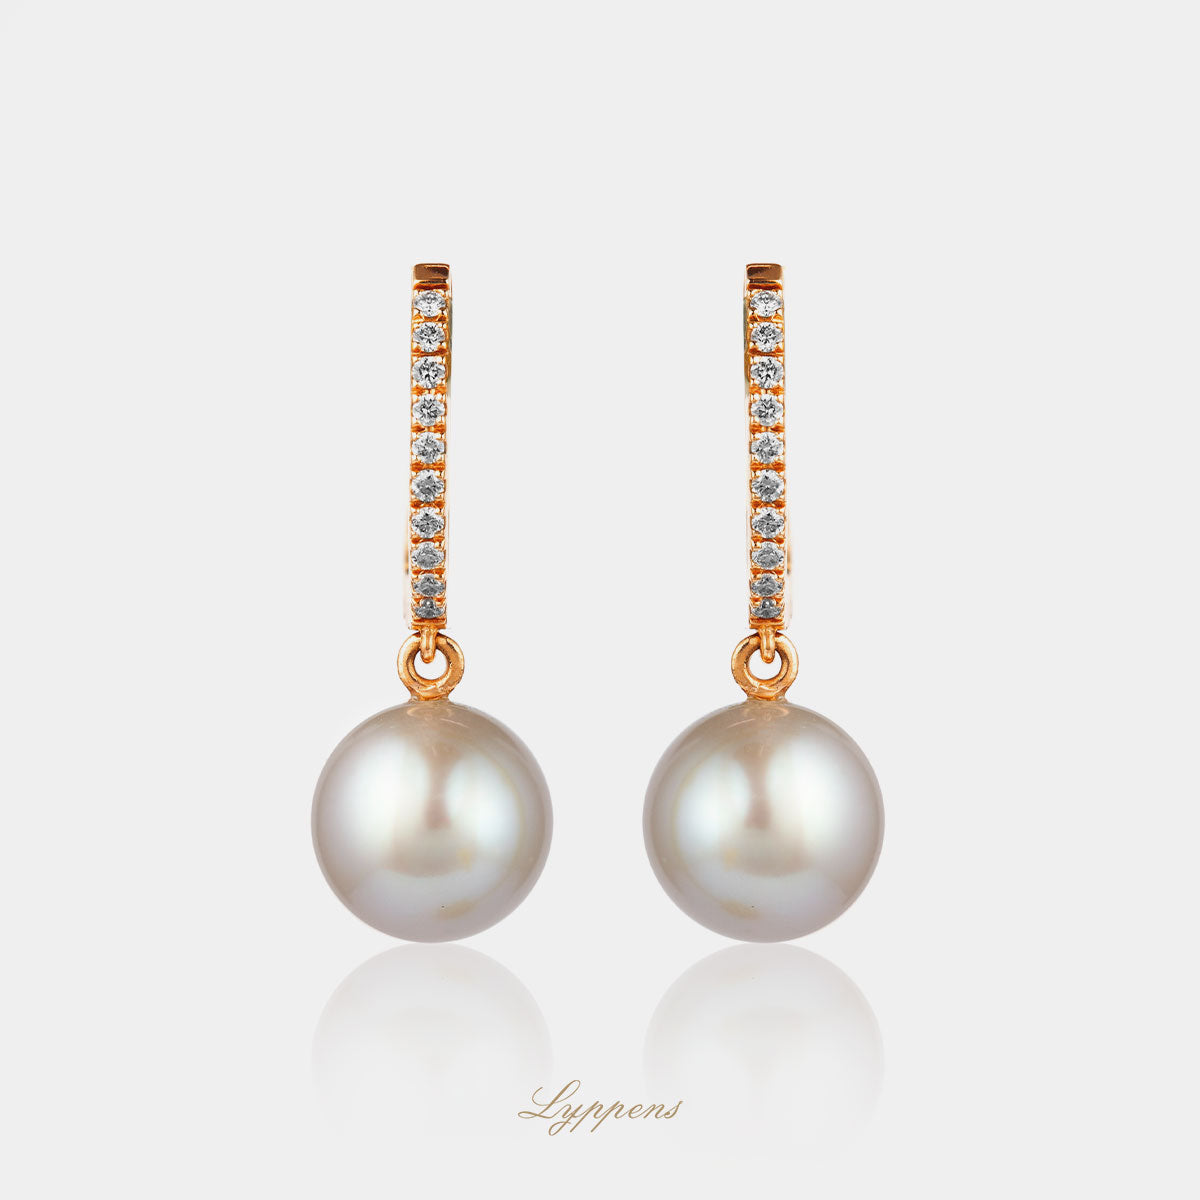 Yellow gold earrings with diamond and gray pearl